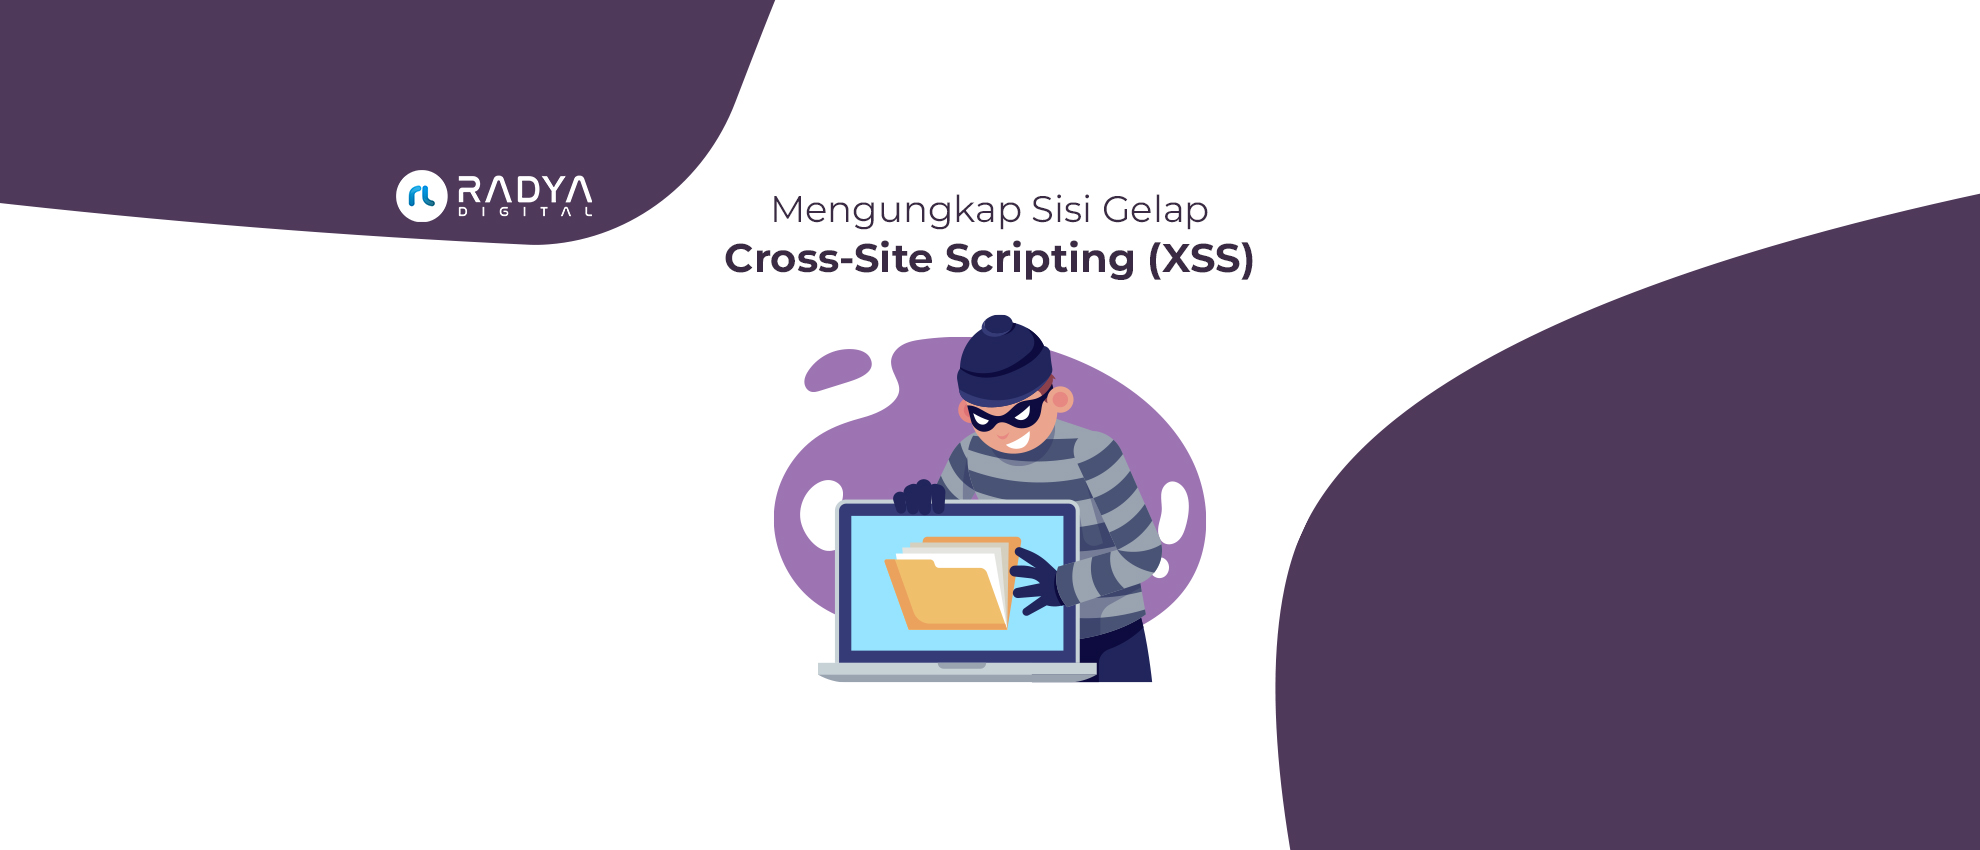 Image of Cross-Site Scripting (XSS): How it Works, Types of Attacks, and Steps to Prevent It